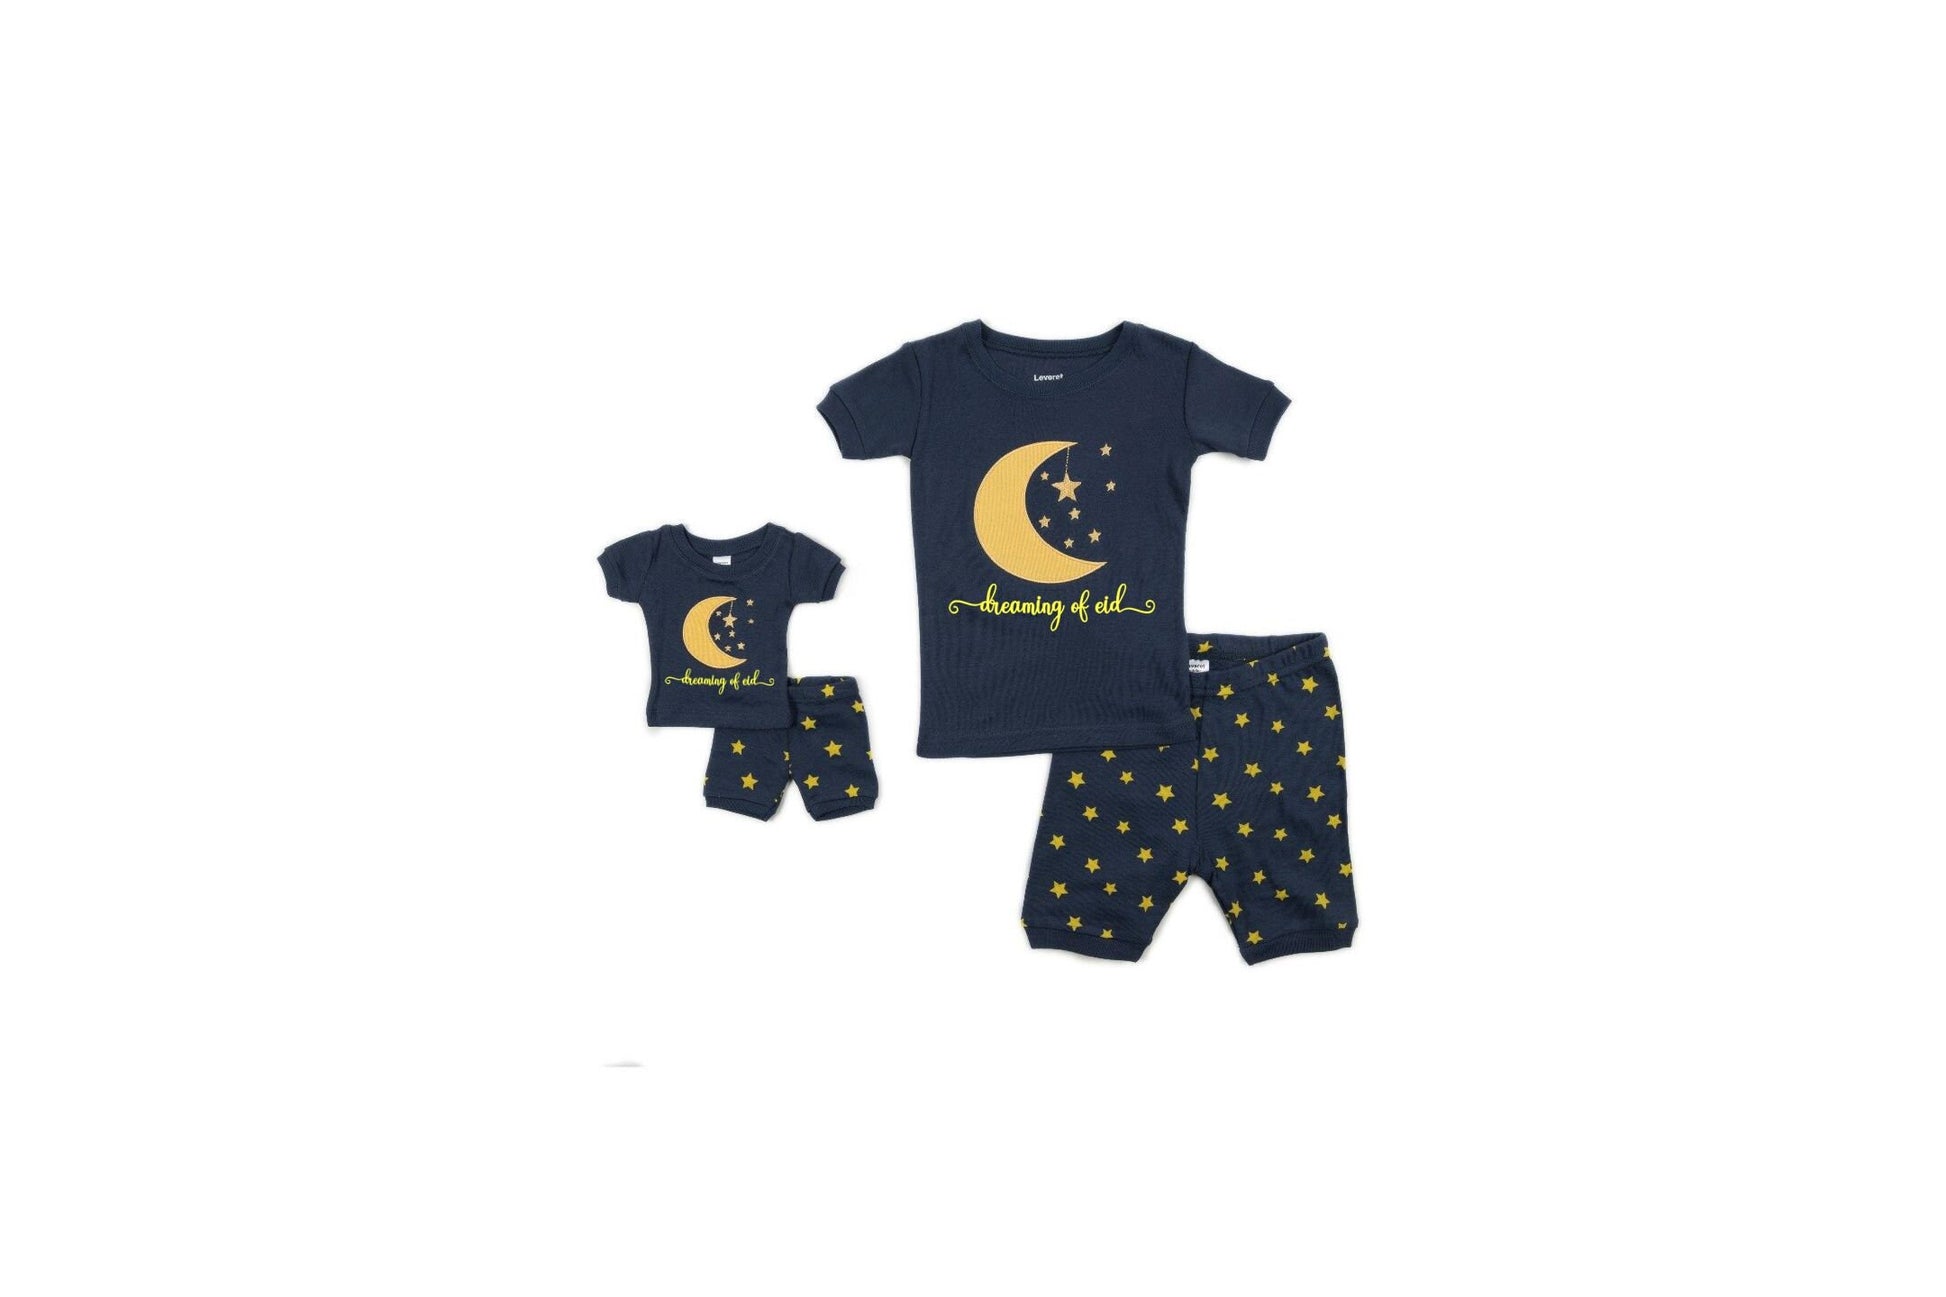 Dreaming of Eid Shorts Toddler and Youth Pajamas - Matching Doll Pajamas - Eid Mubarak Pajamas - Eid Kids Pajamas - Gifts for Eid